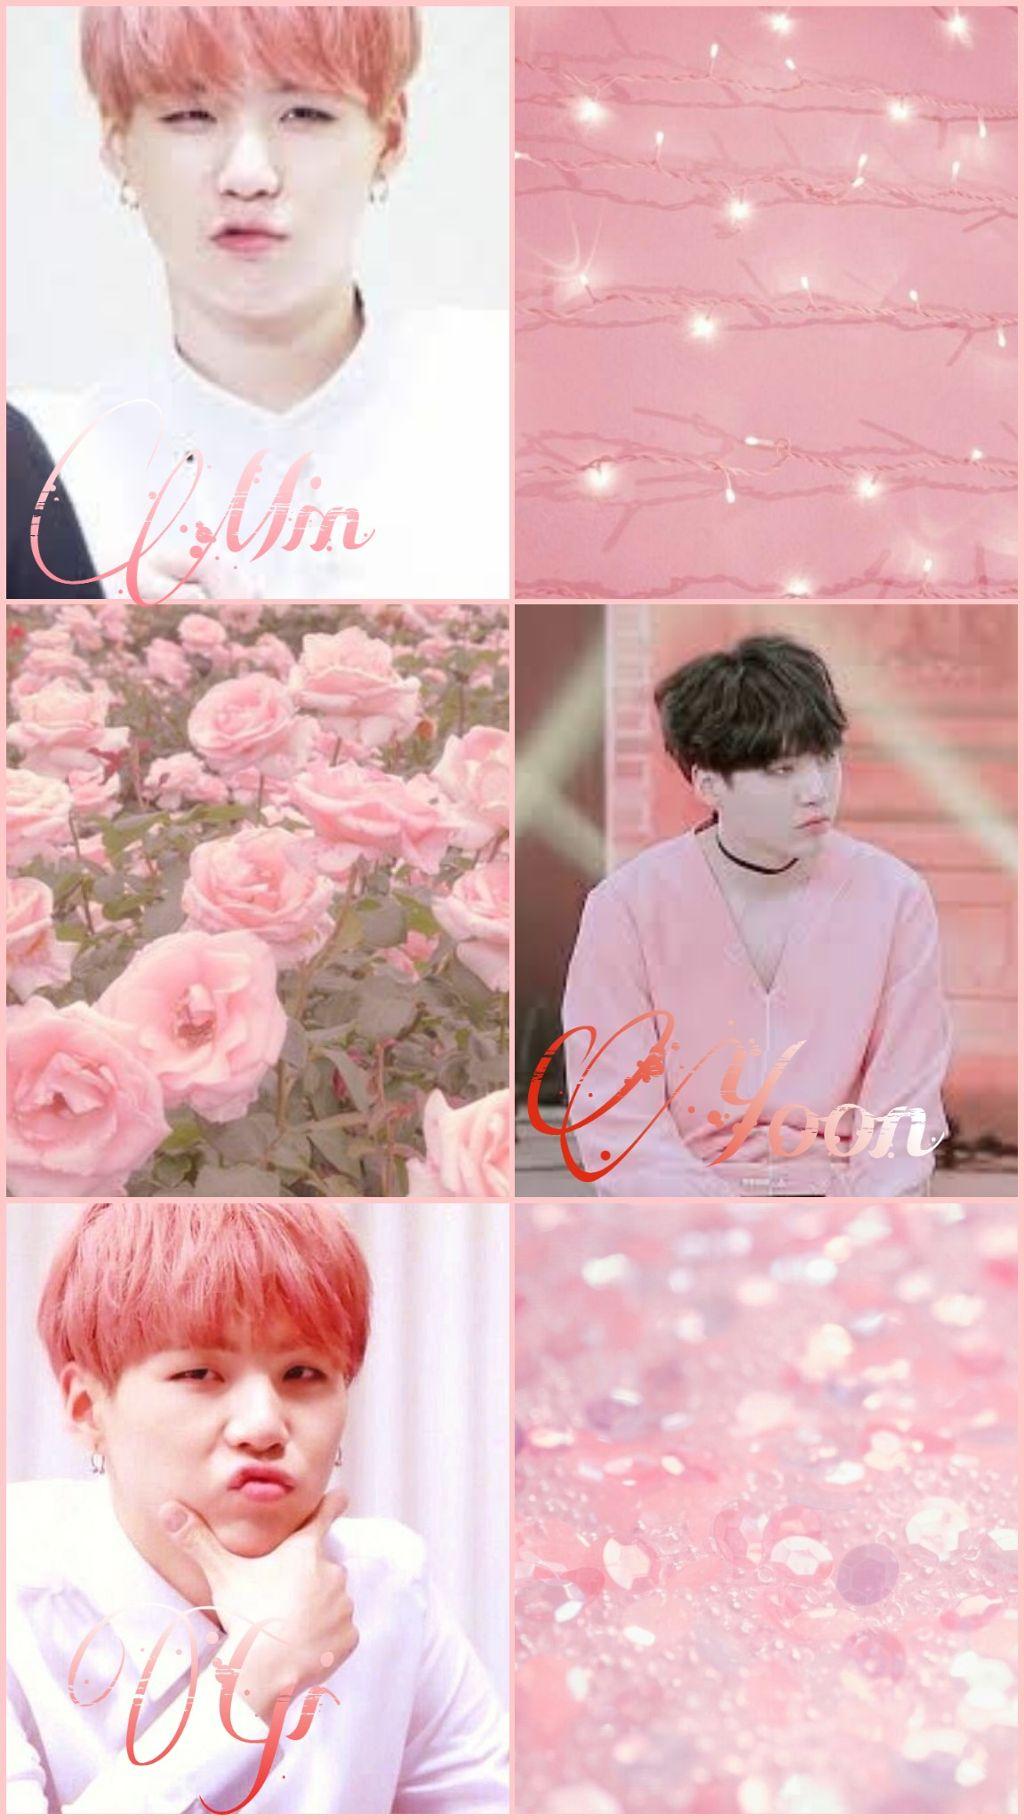 Aesthetic wallpapers for all the ARMYs out there! These are for all the boys in the world, especially for Jin, Jimin, V, and Jungkook. - Suga